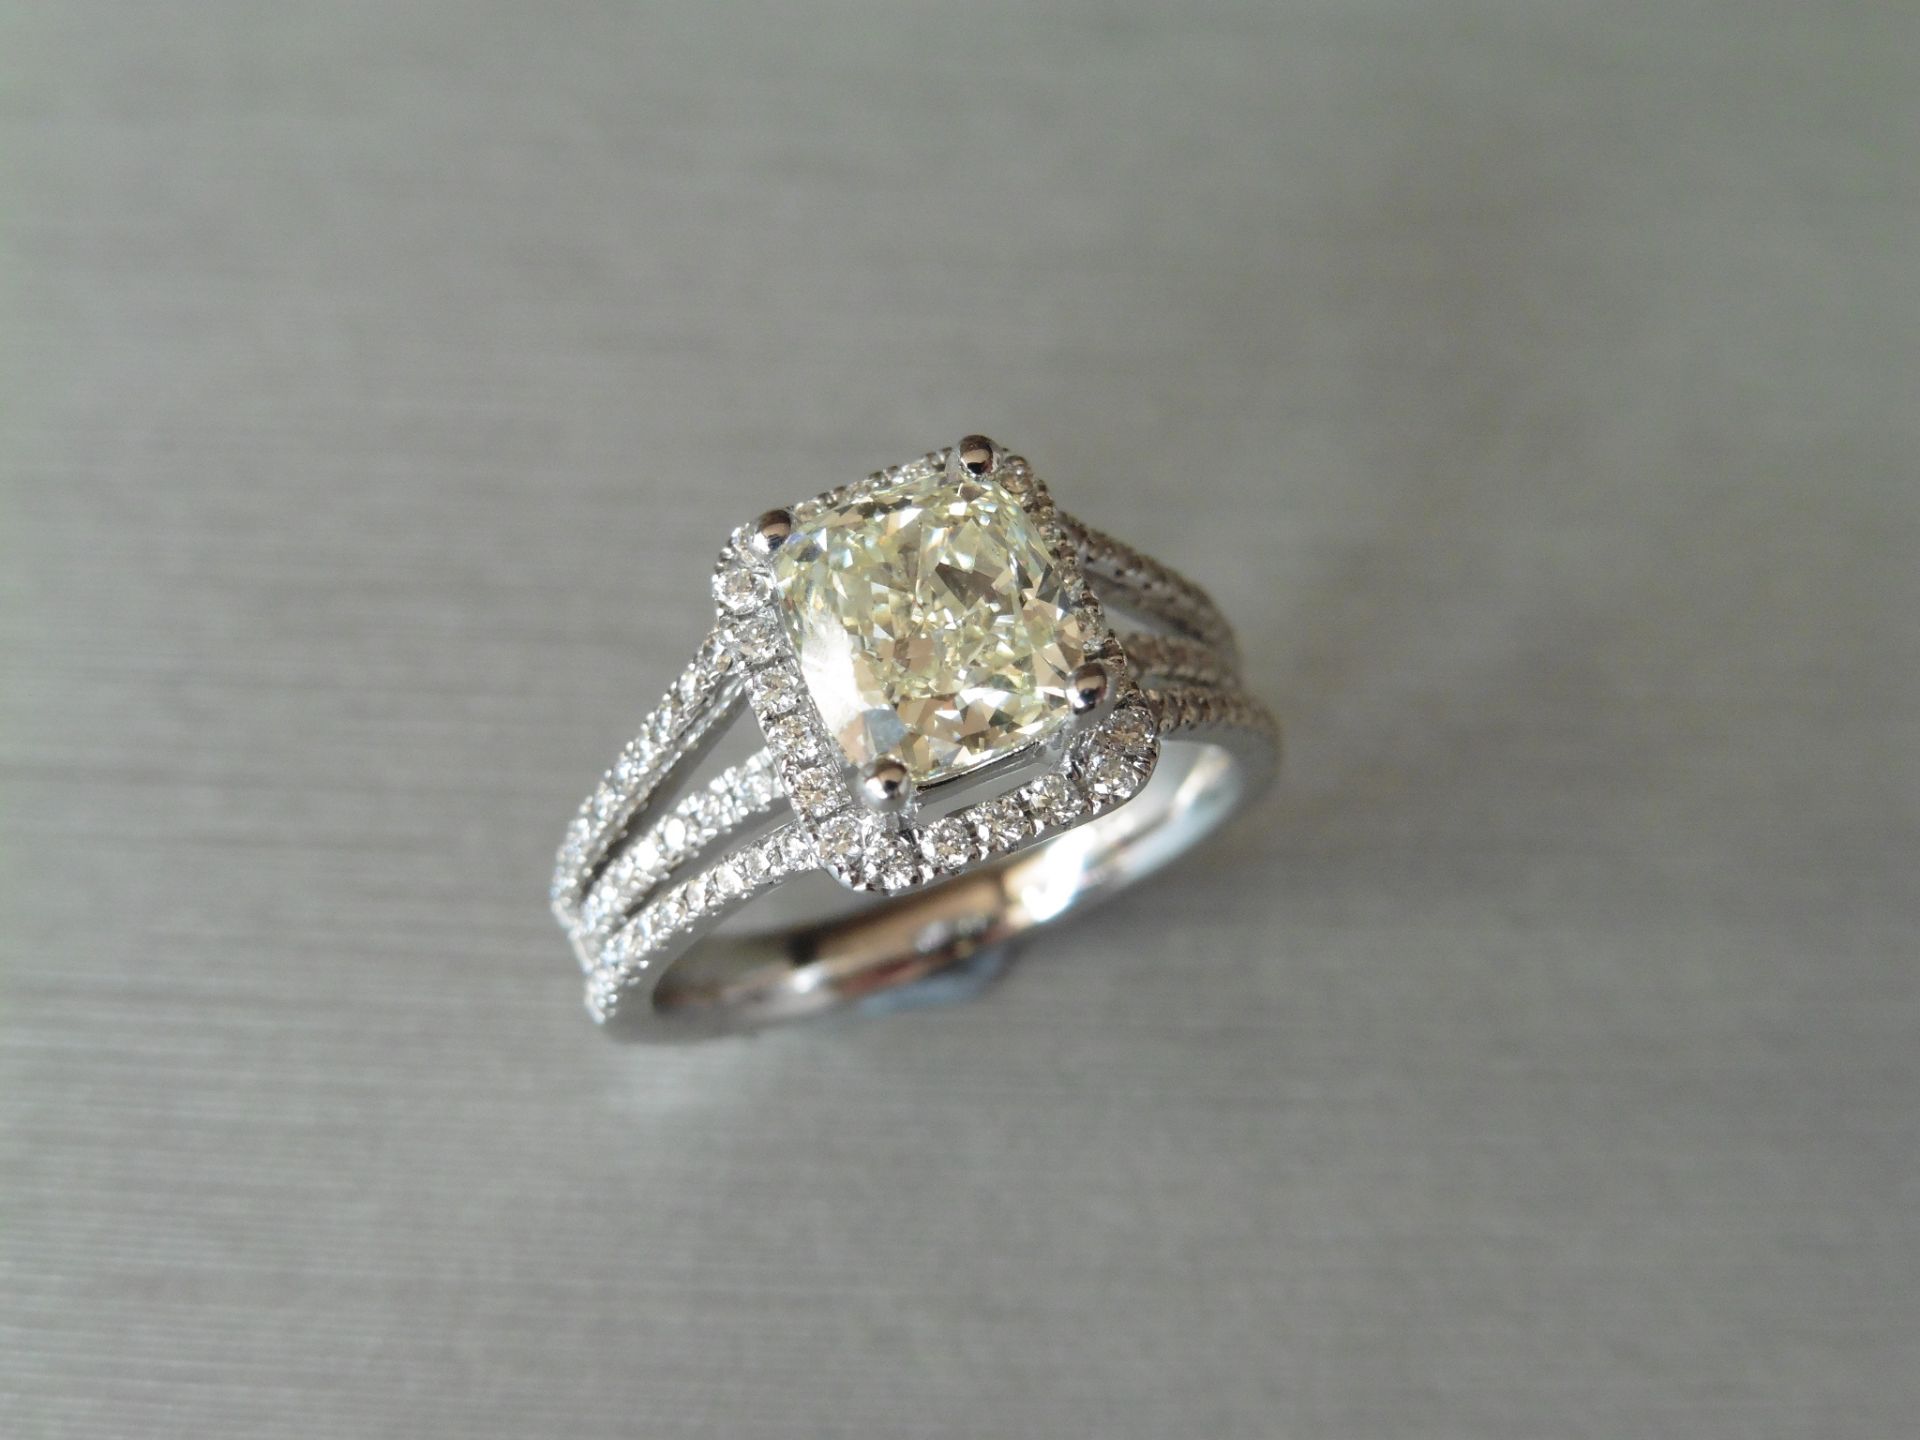 1.70ct diamond solitaire ring. Centre stone is a 1.70ct radiant cut diamond, fancy light yellow